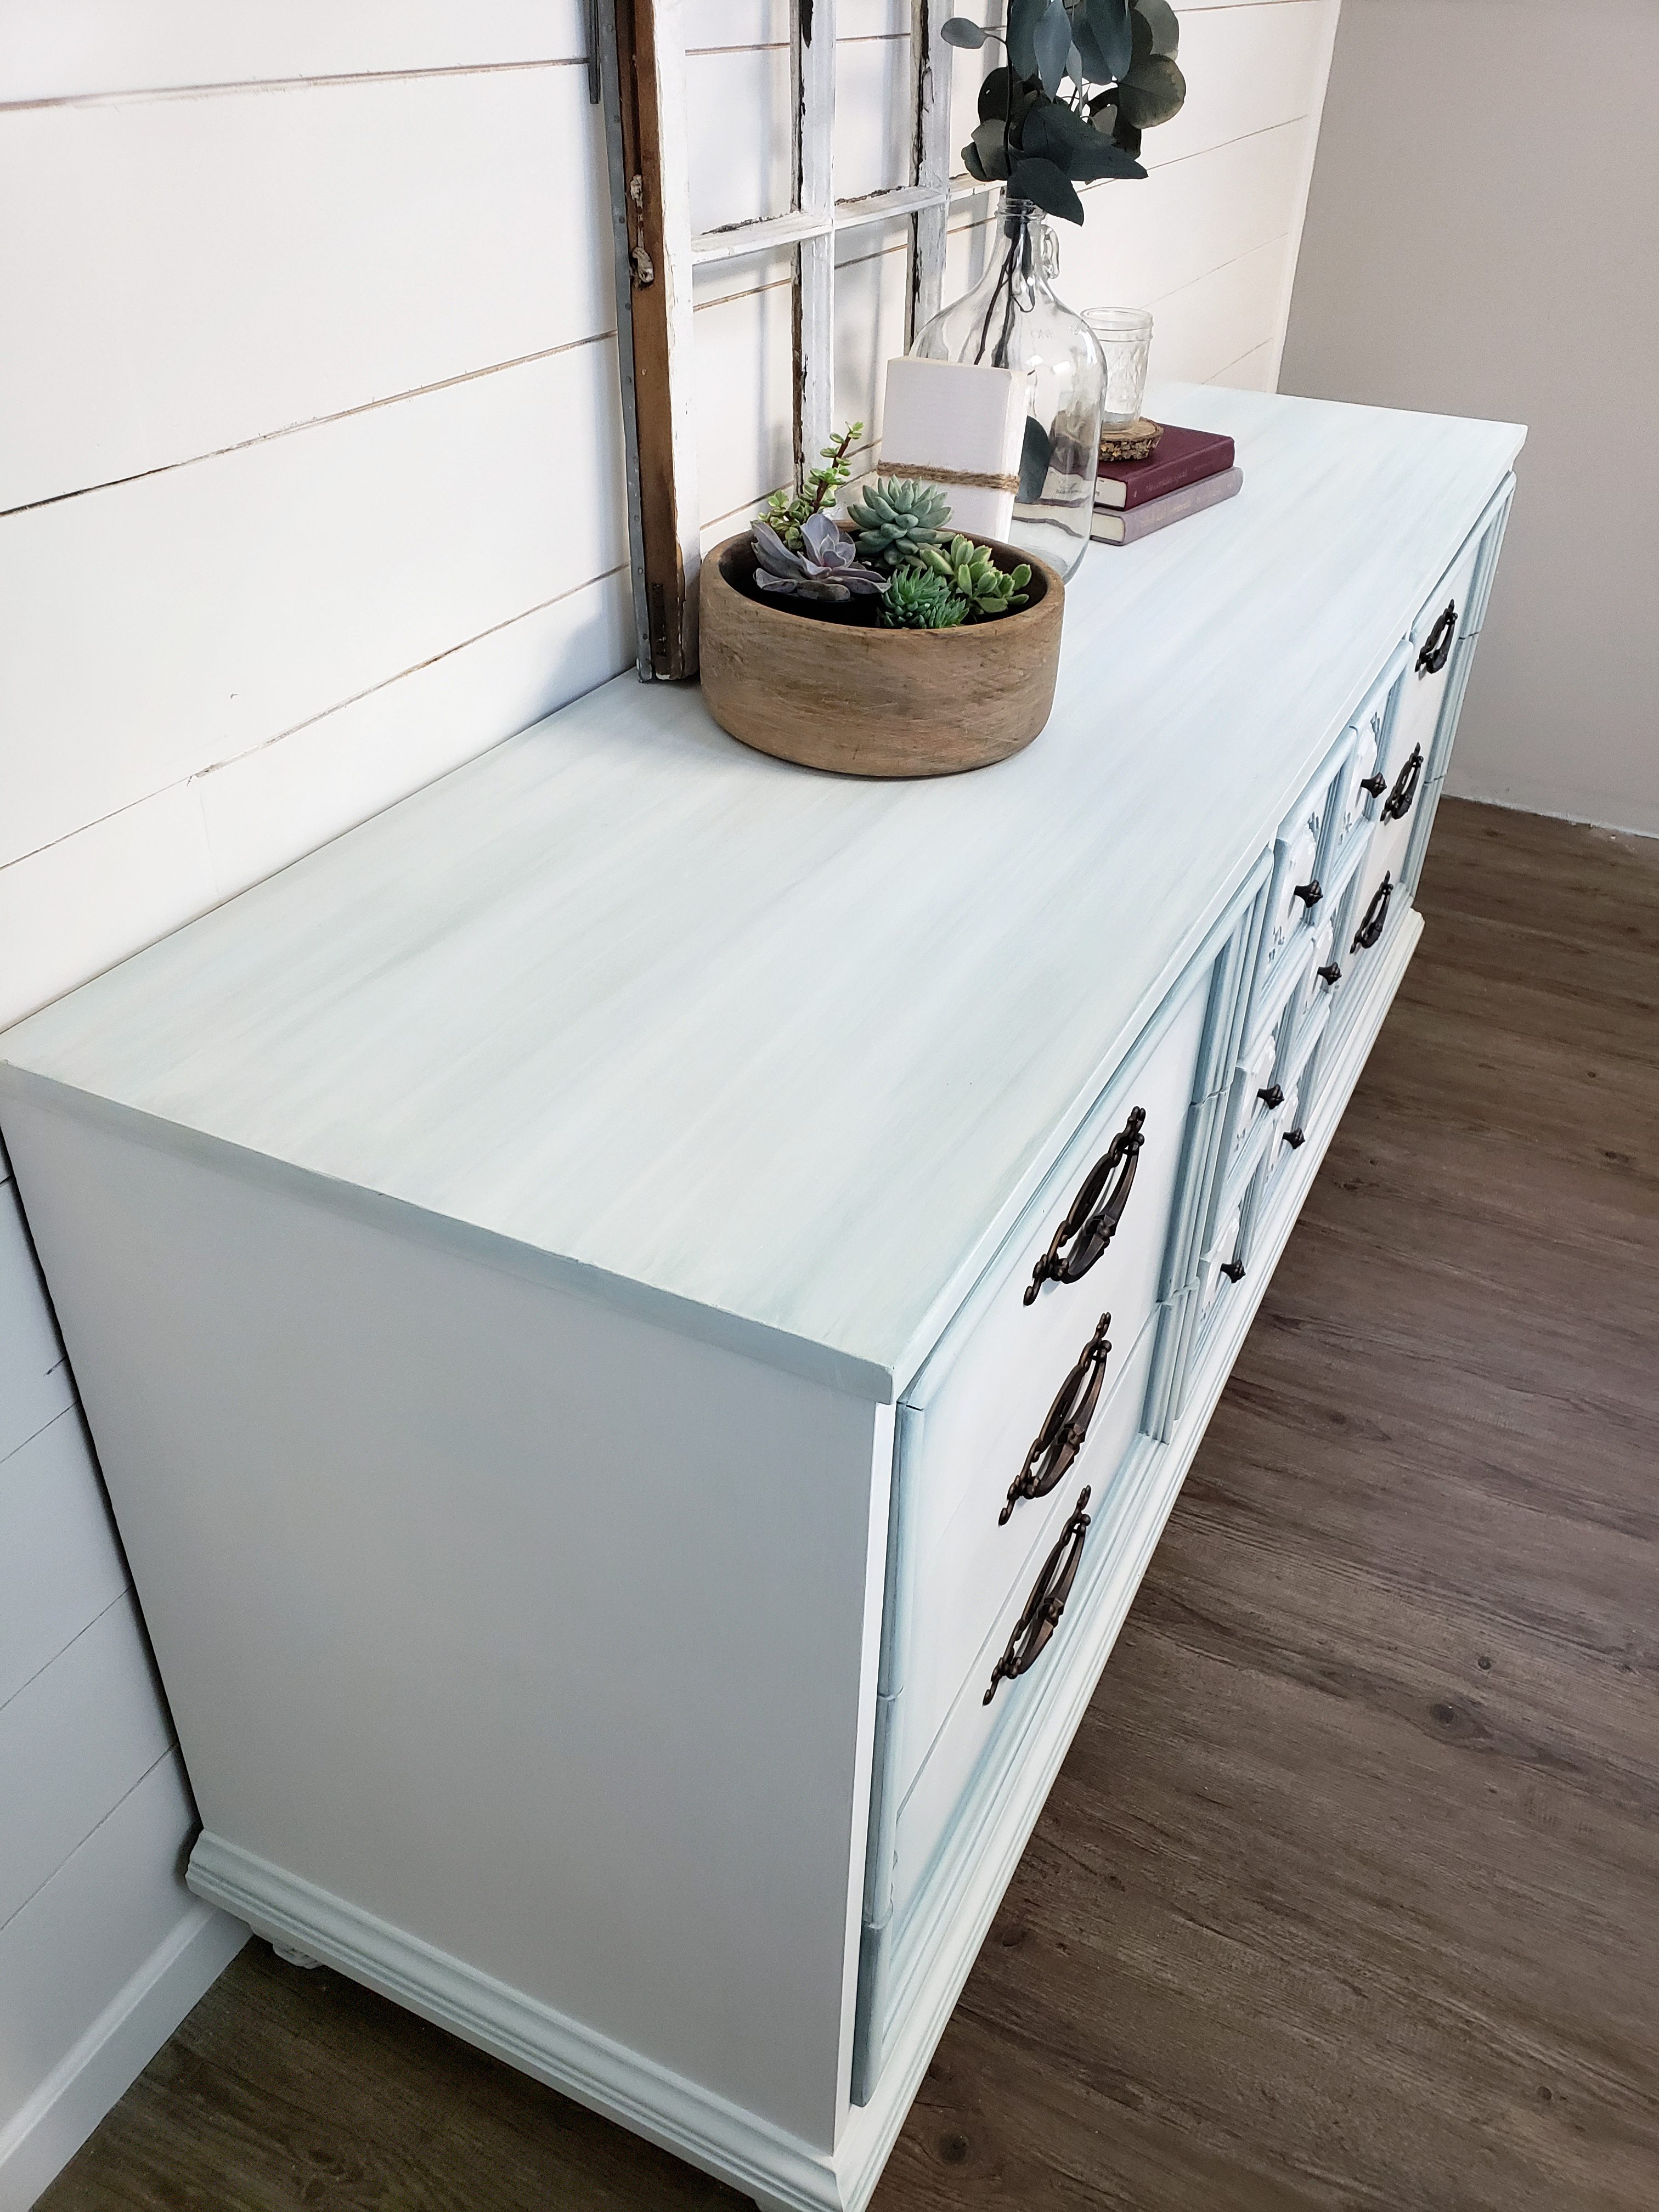 How to Blend Paint on a Dresser